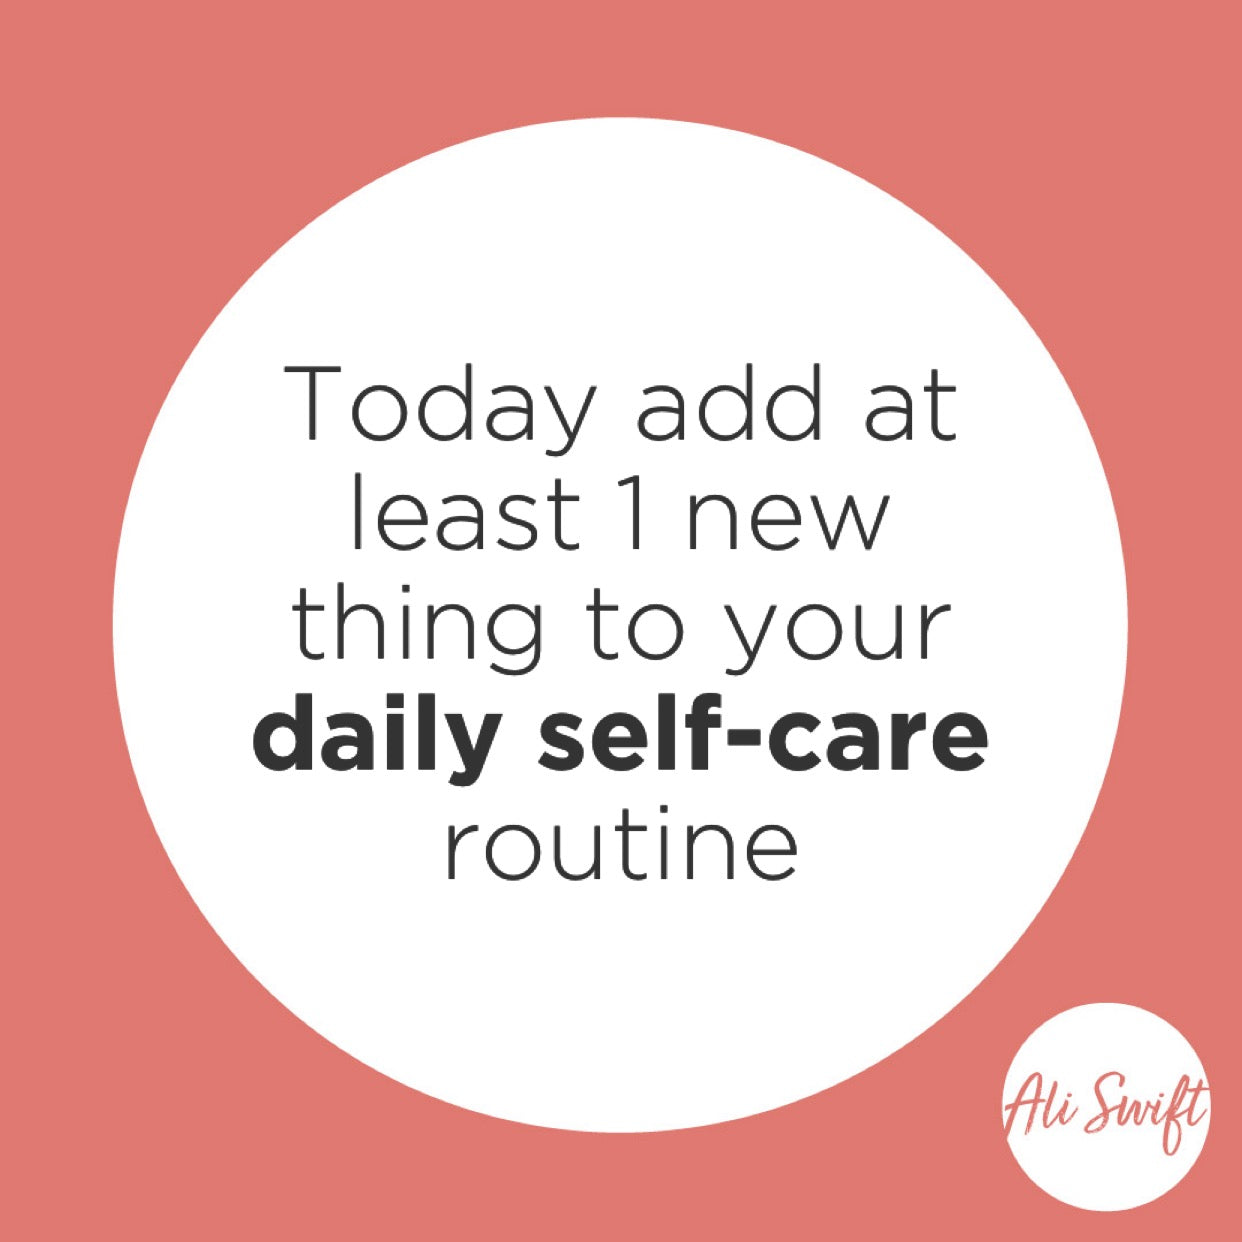 ADD ONE NEW SELF-CARE ACTIVITY TO YOUR DAY